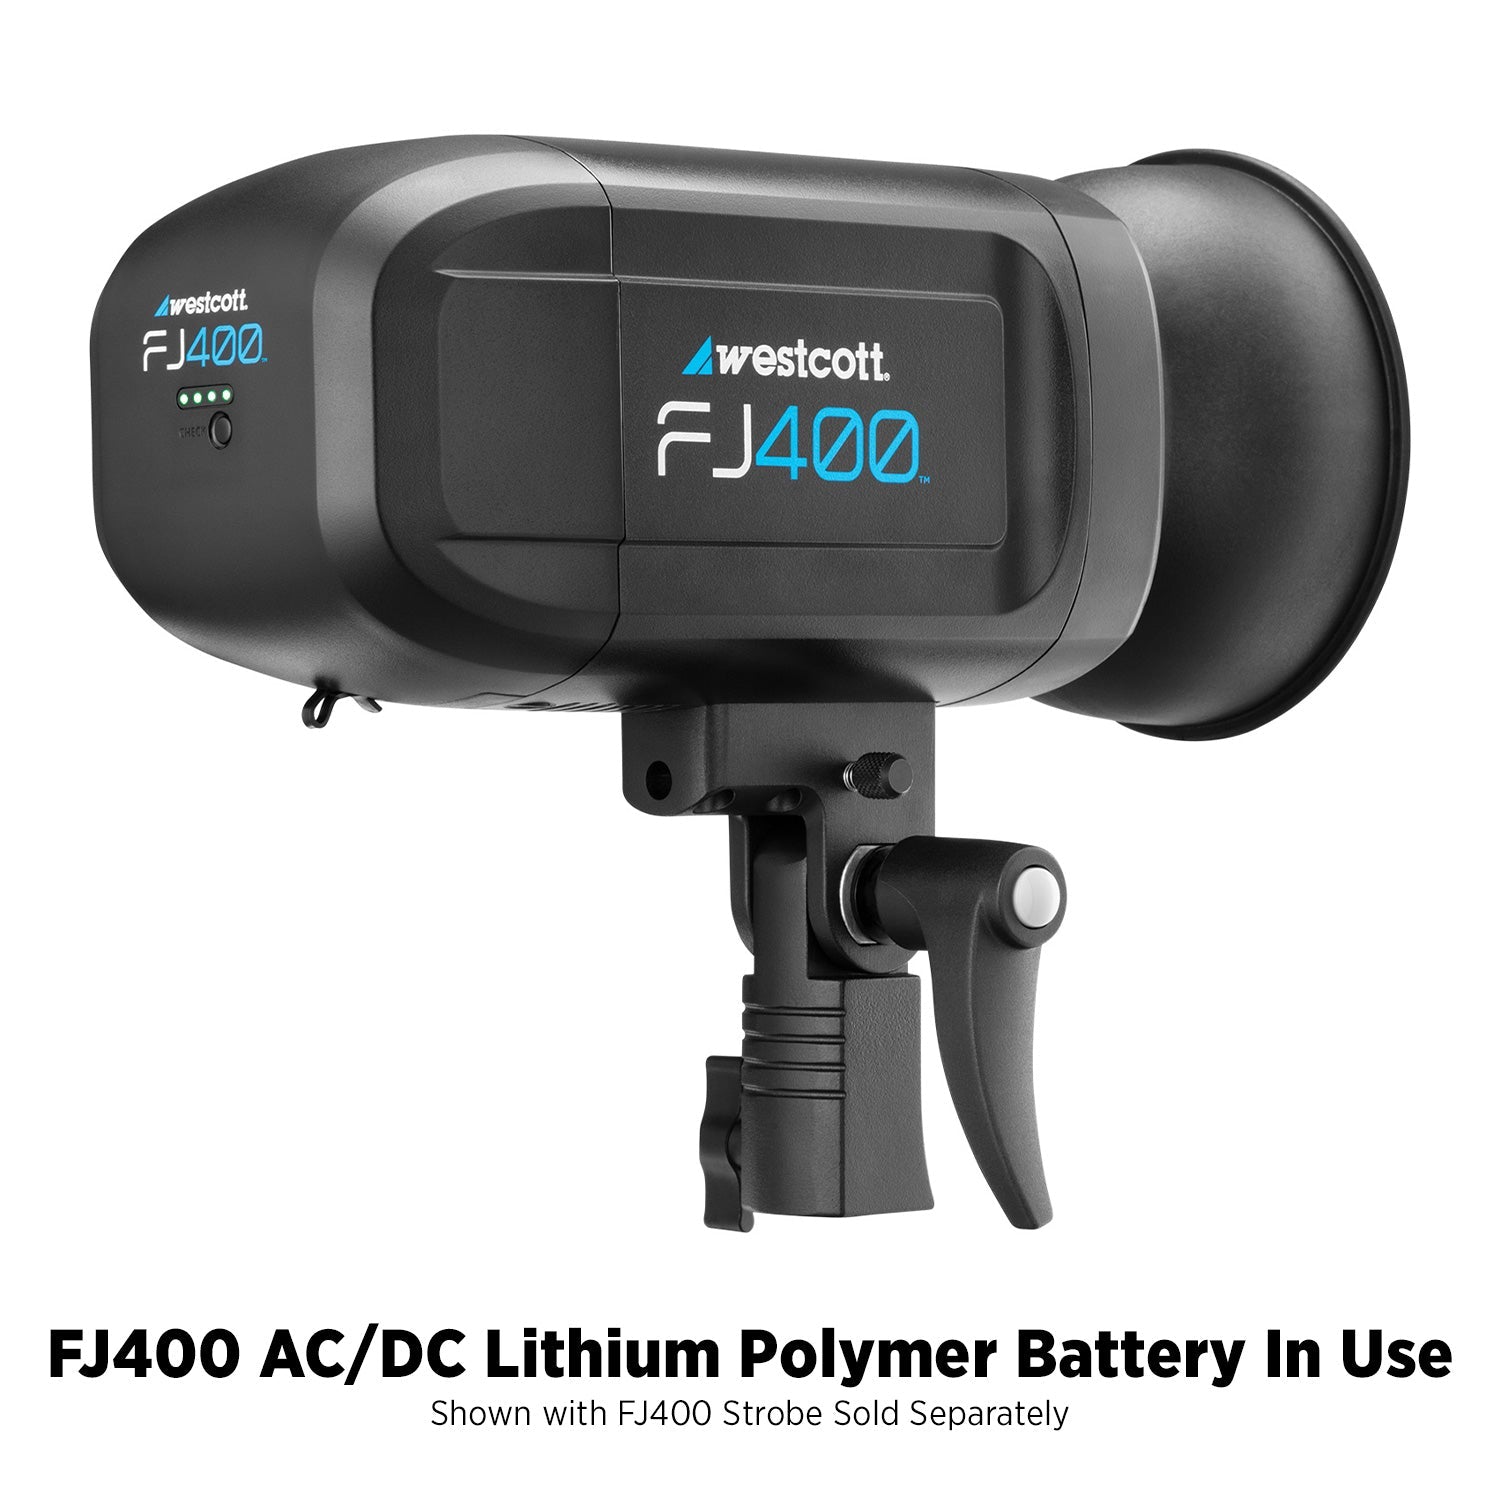 FJ400 AC/DC Lithium Polymer Battery (with Charger)